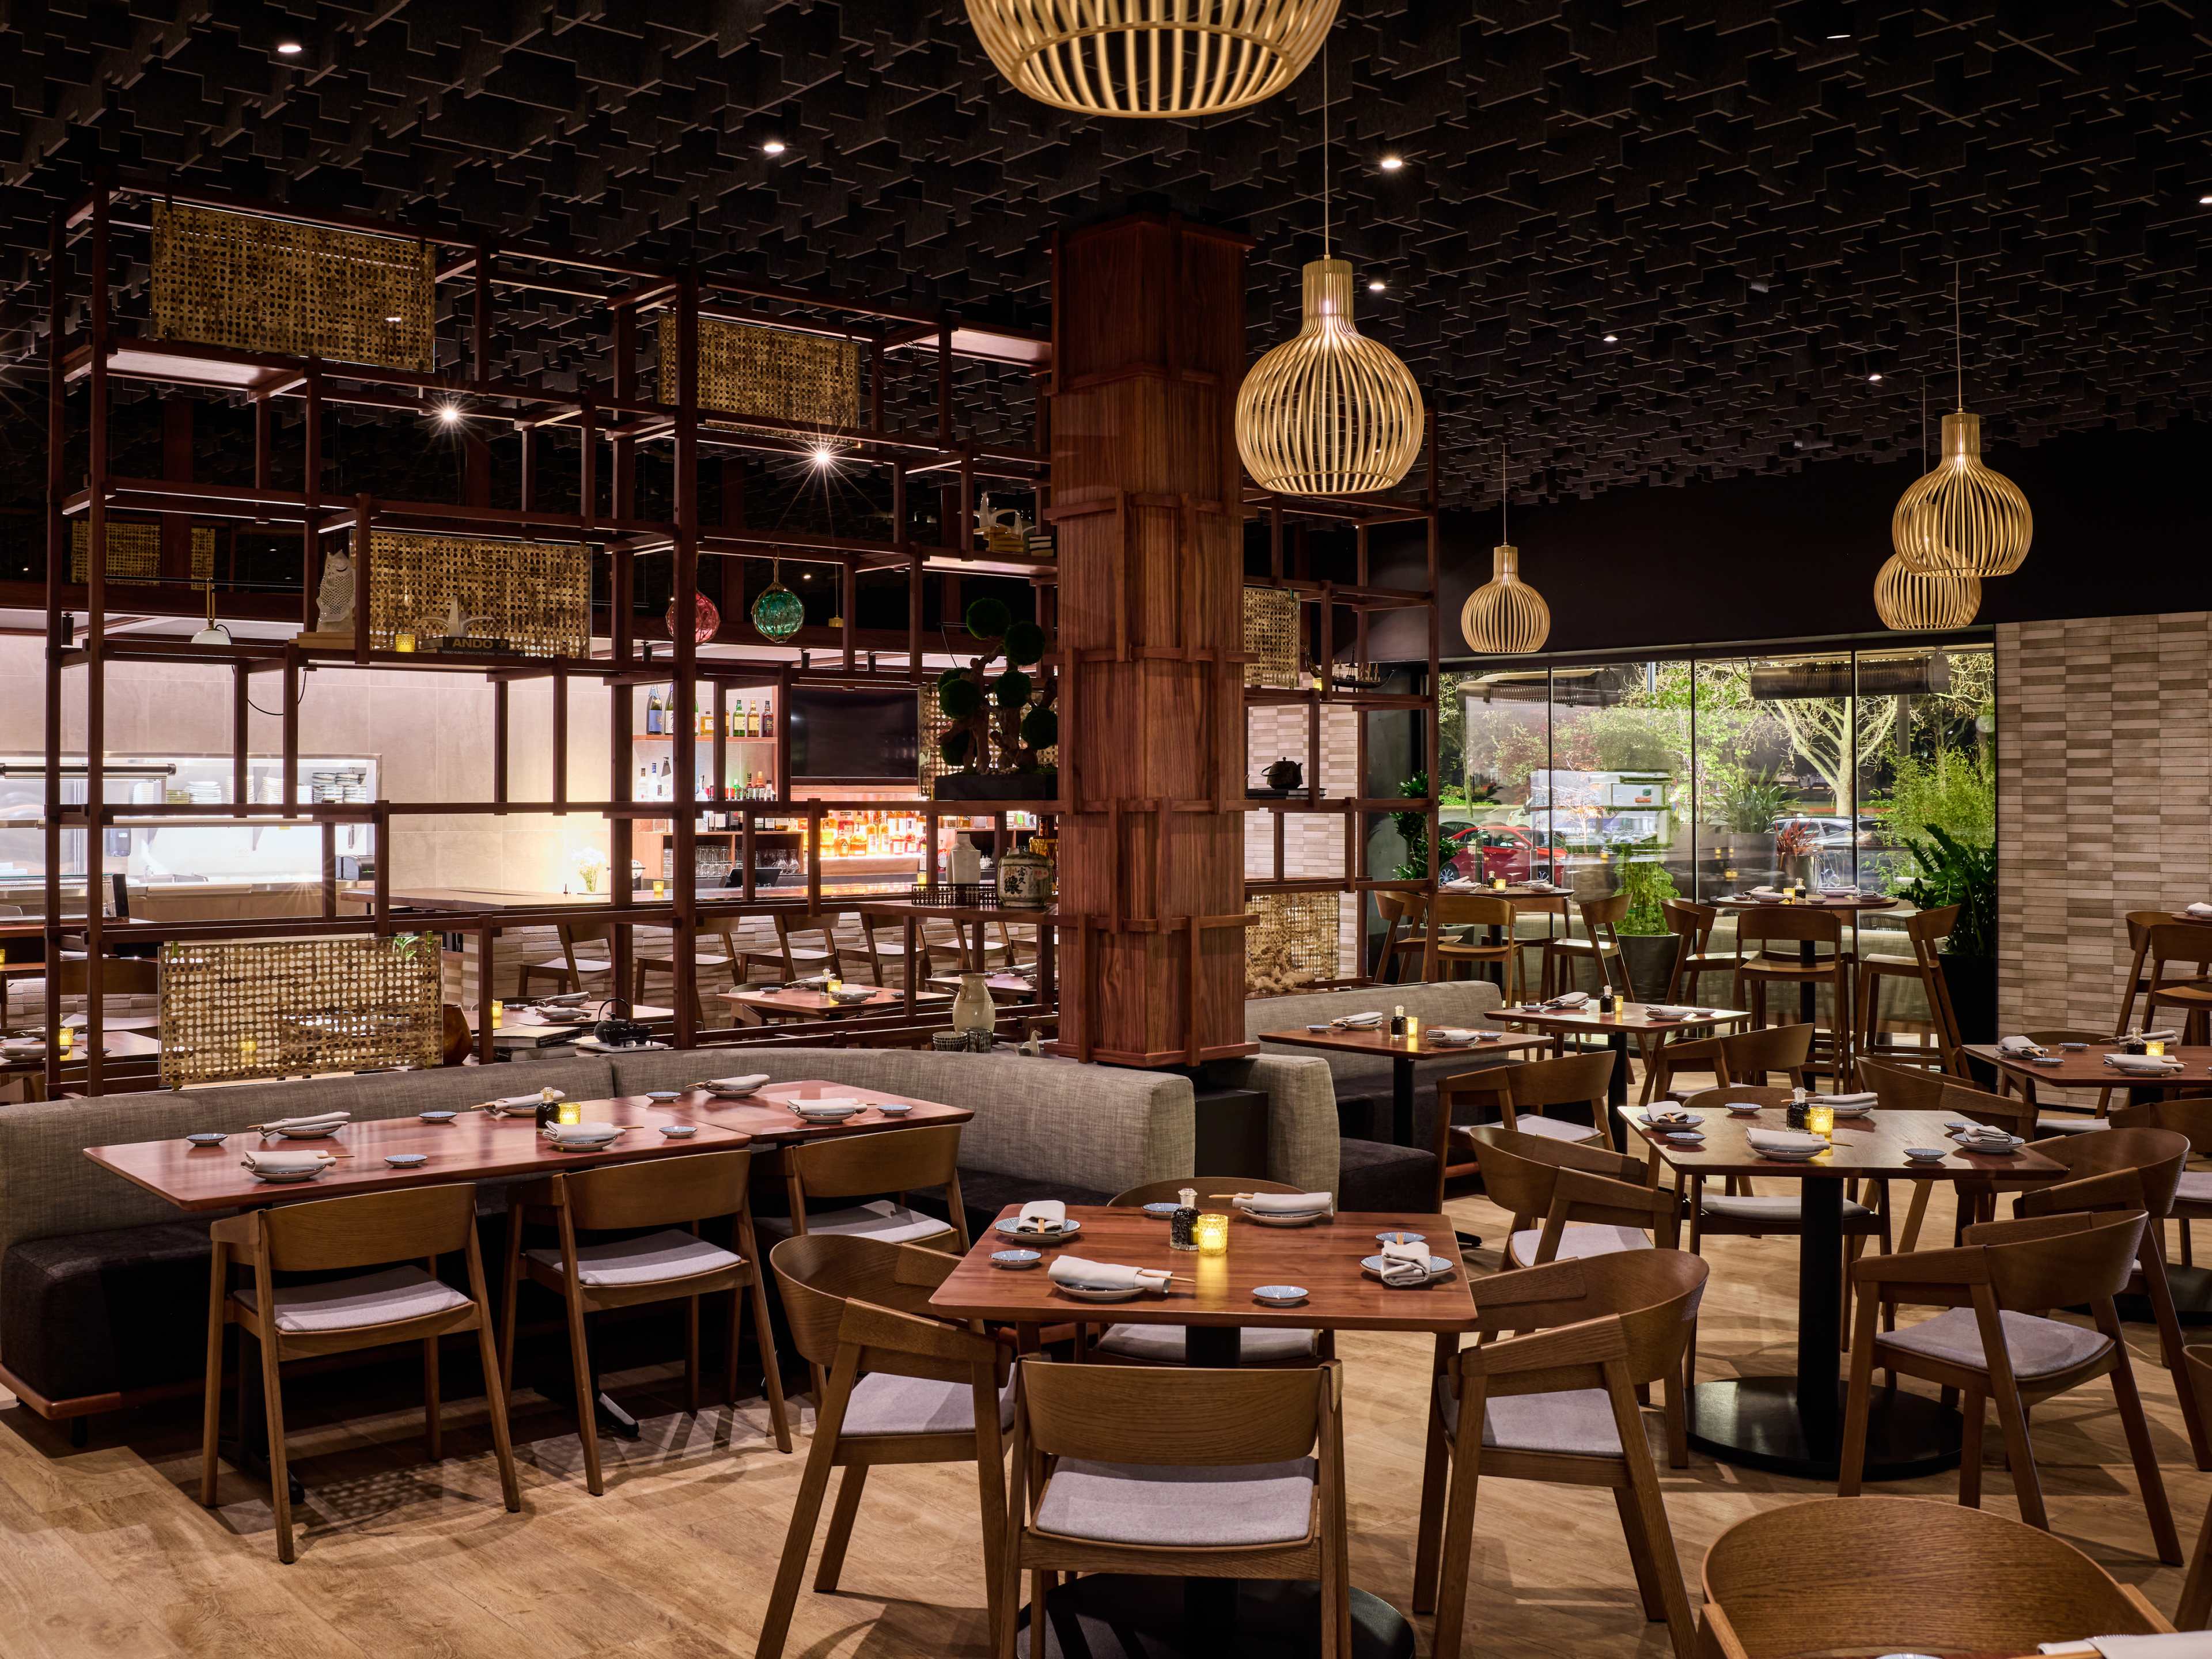 interior of restaurant with wooden shelving and hanging light fixtures